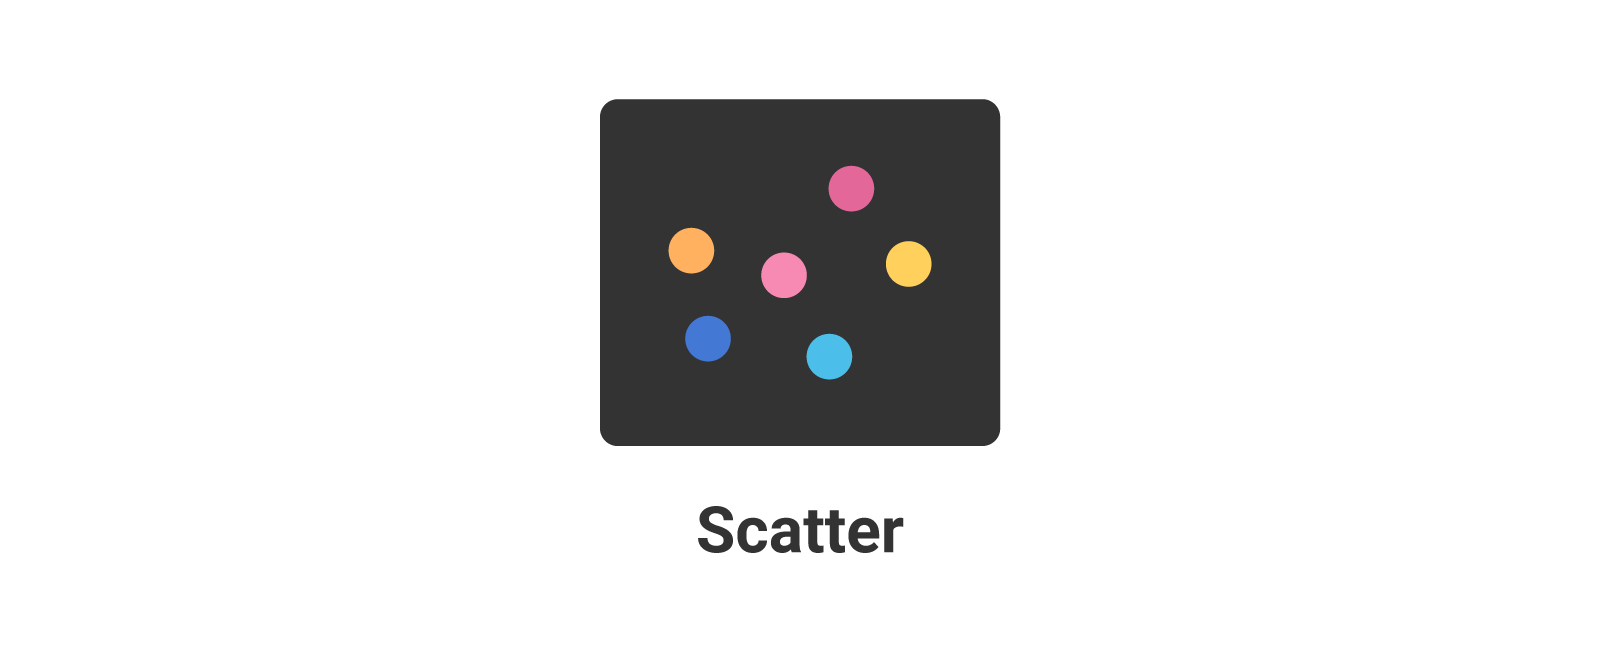 scatter plot example